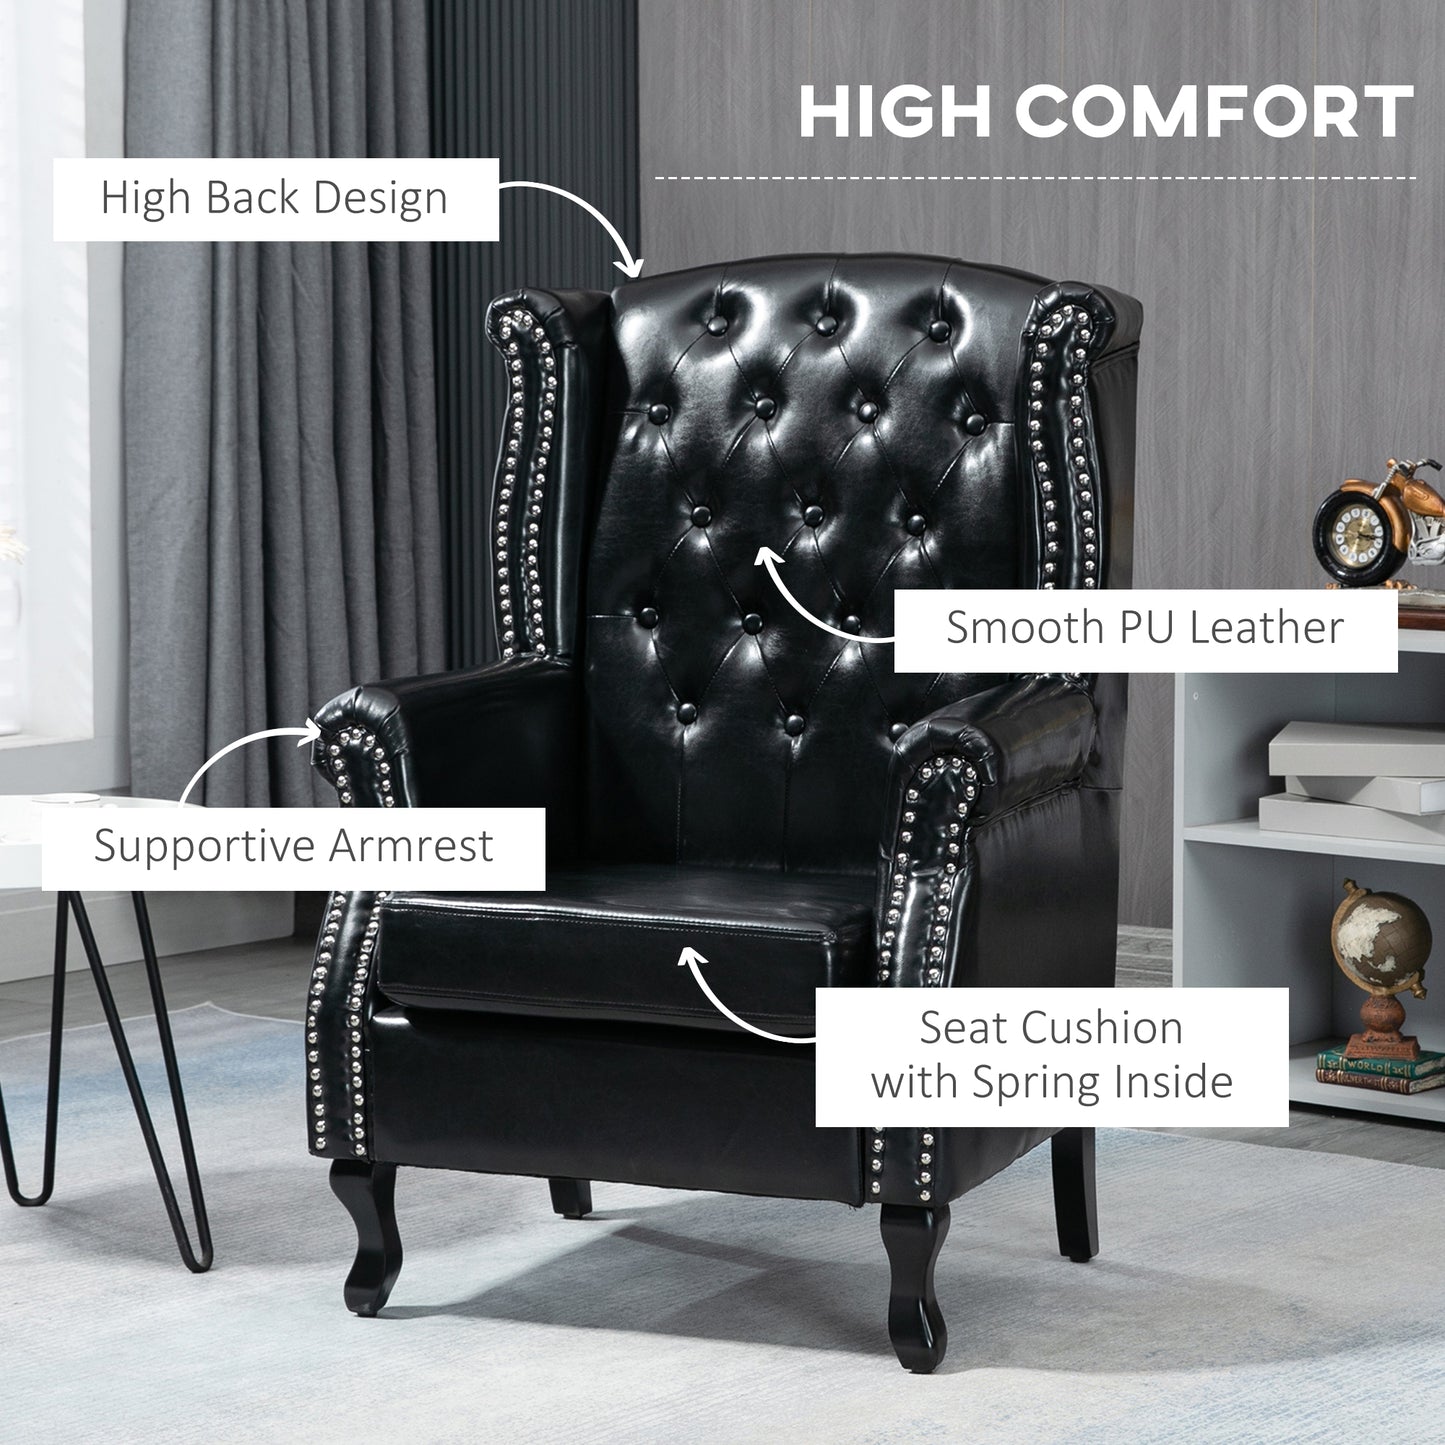 HOMCOM Chesterfield-style Wingback Accent Chair, Tufted Armchair with Nail Head Trim for Living Room Bedroom, Black